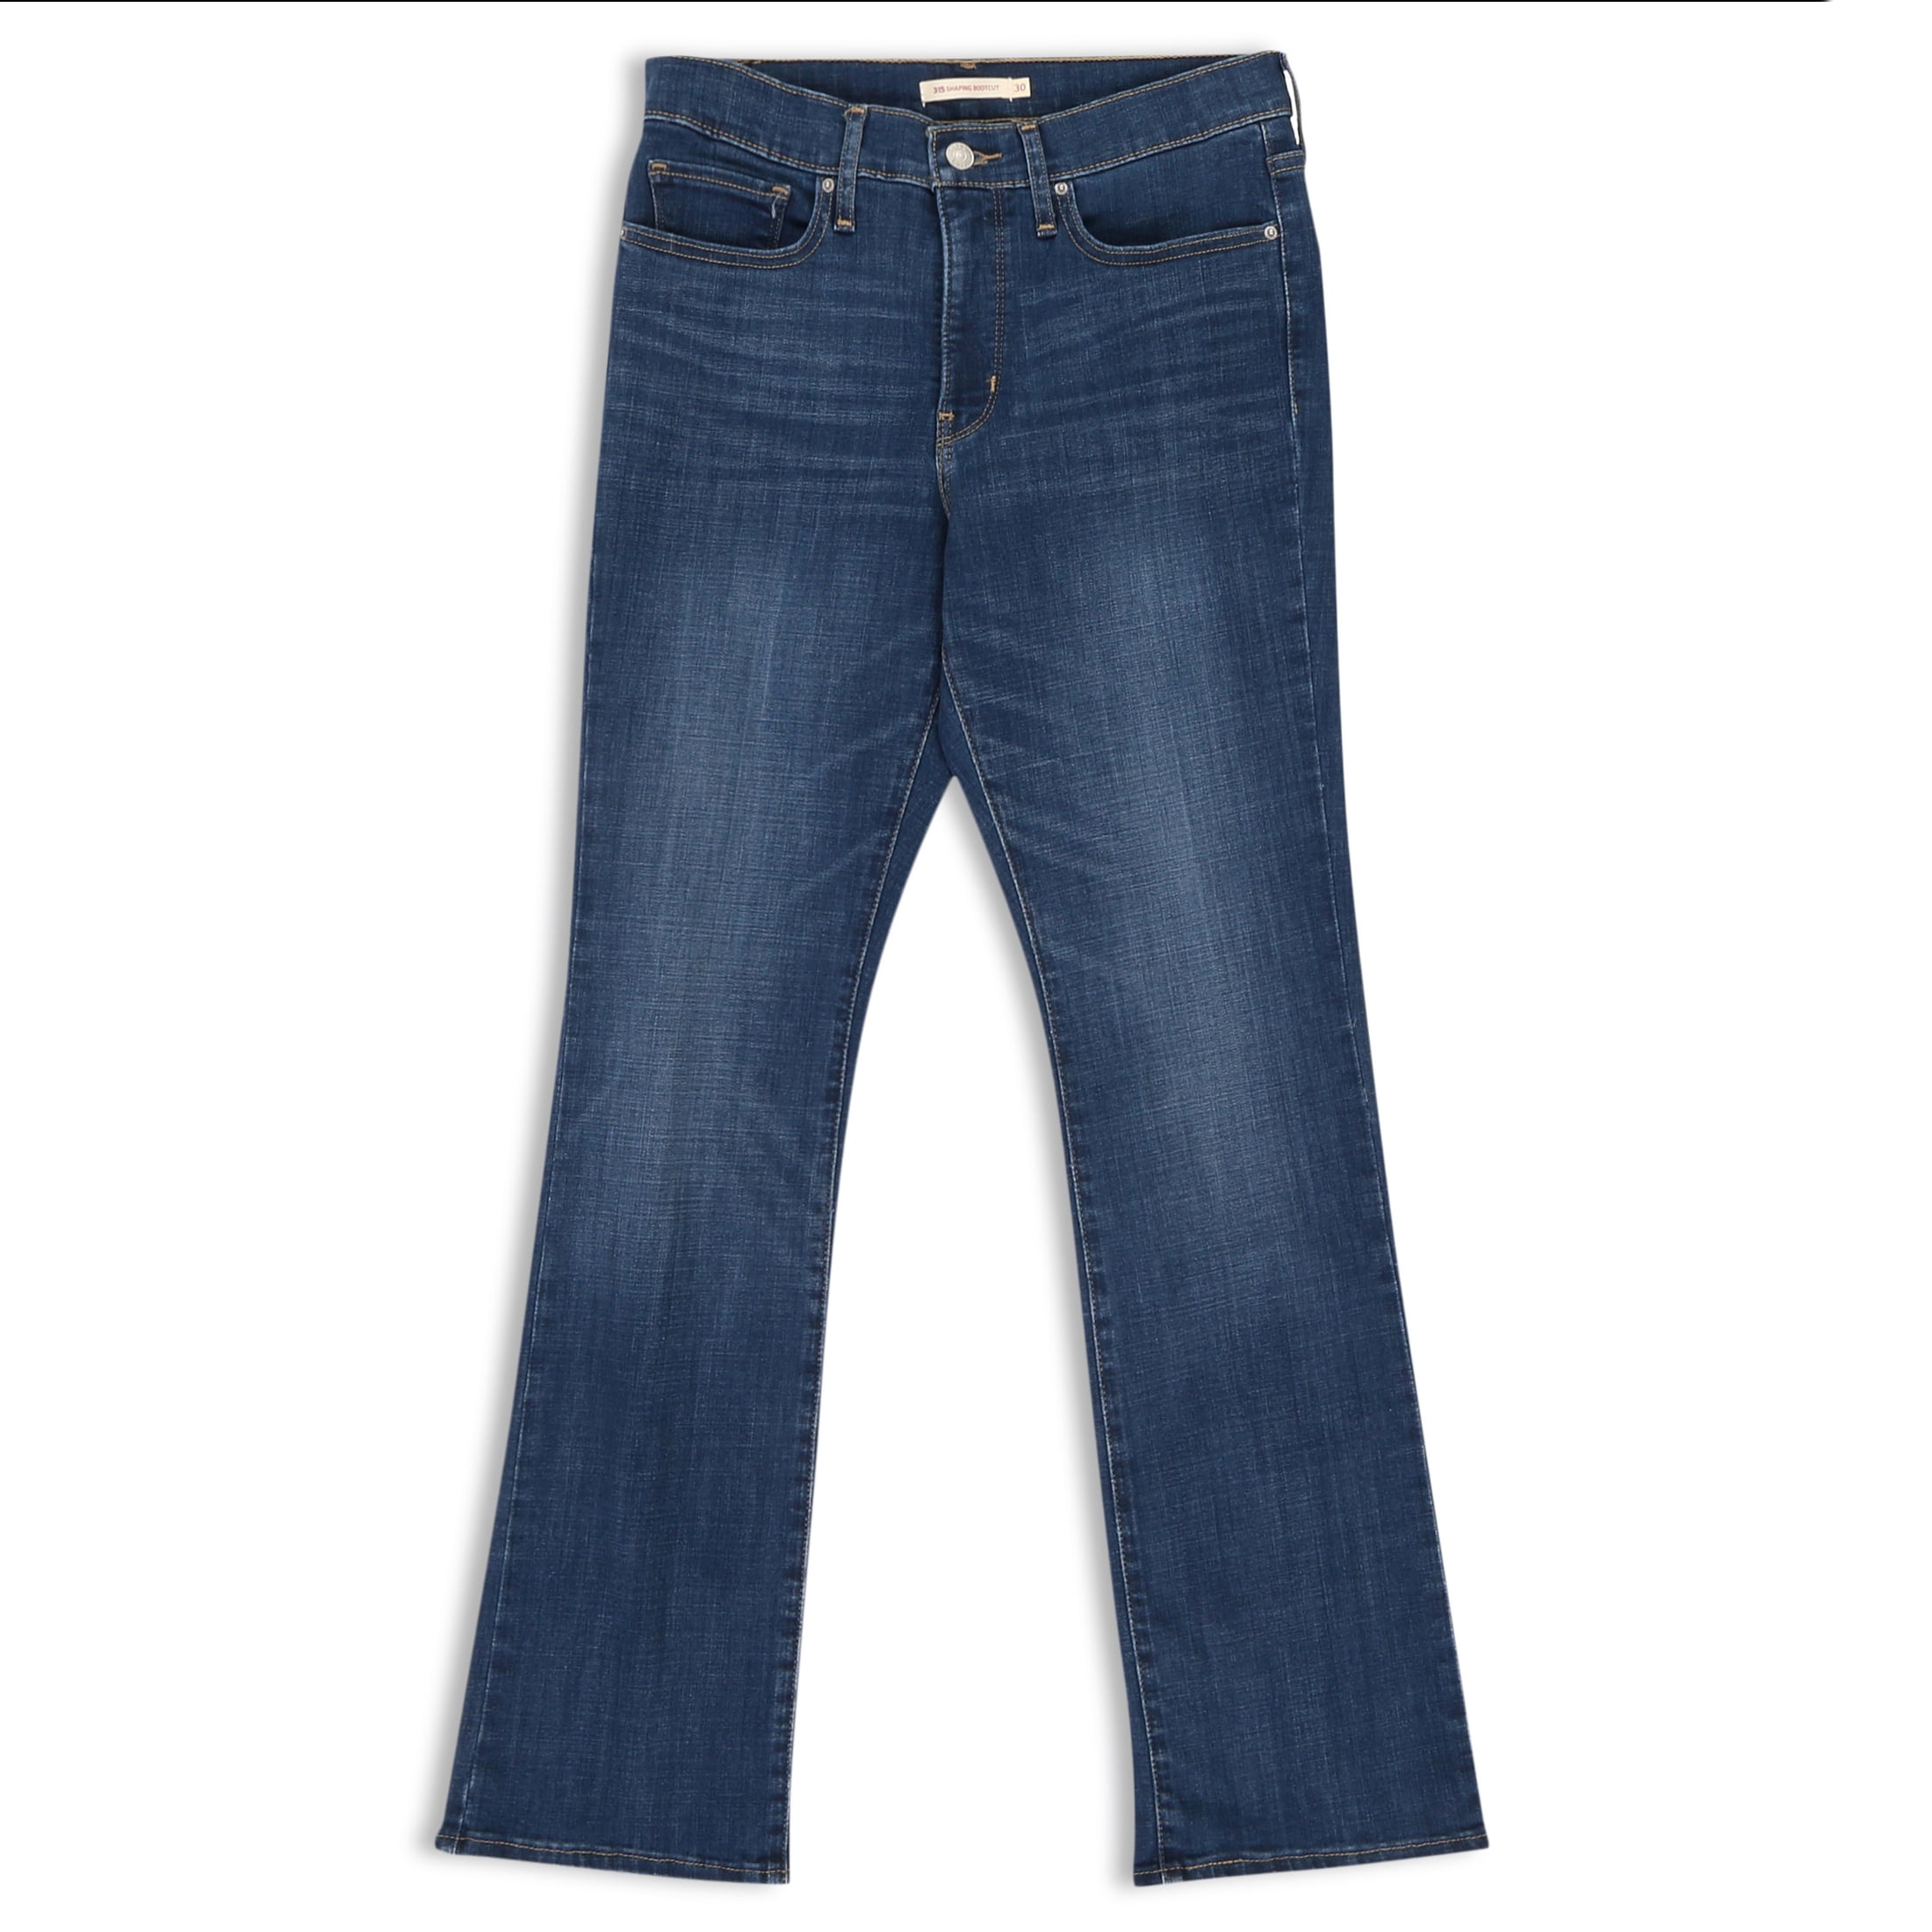 Levi's® Bootcut jeans 315 SHAPING BOOTCUT in 76 med indigo - worn in